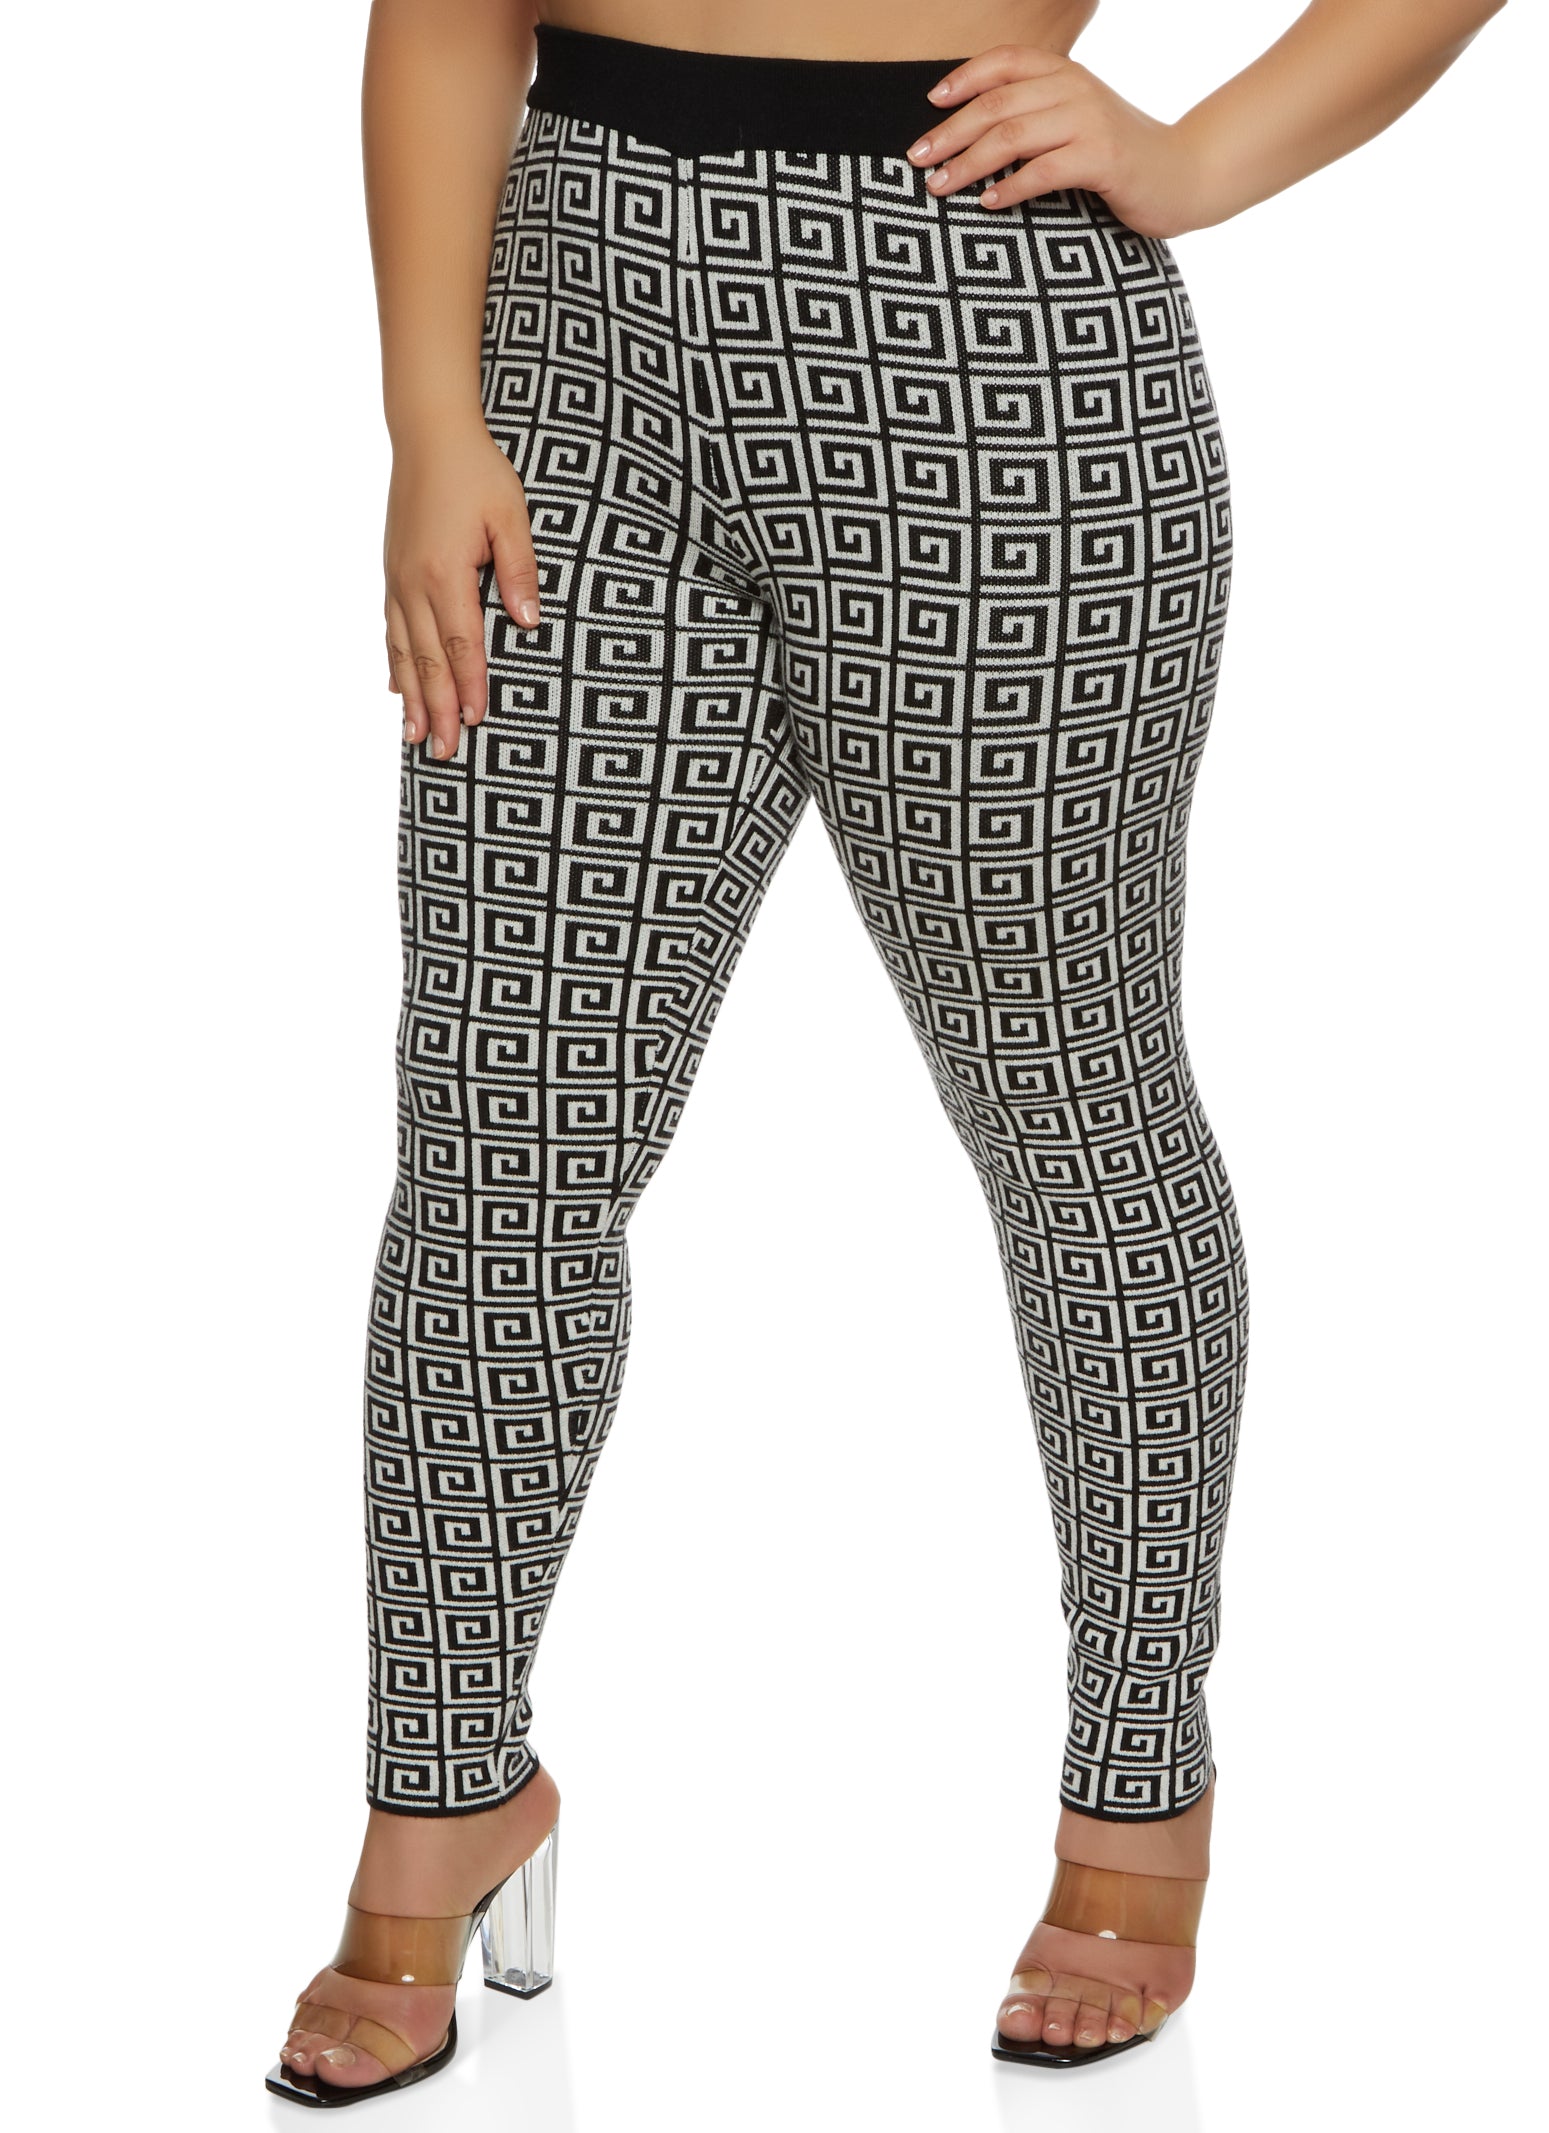 LEG-34 {Puzzled} Gray/Red Puzzle Print Leggings EXTENDED PLUS SIZE